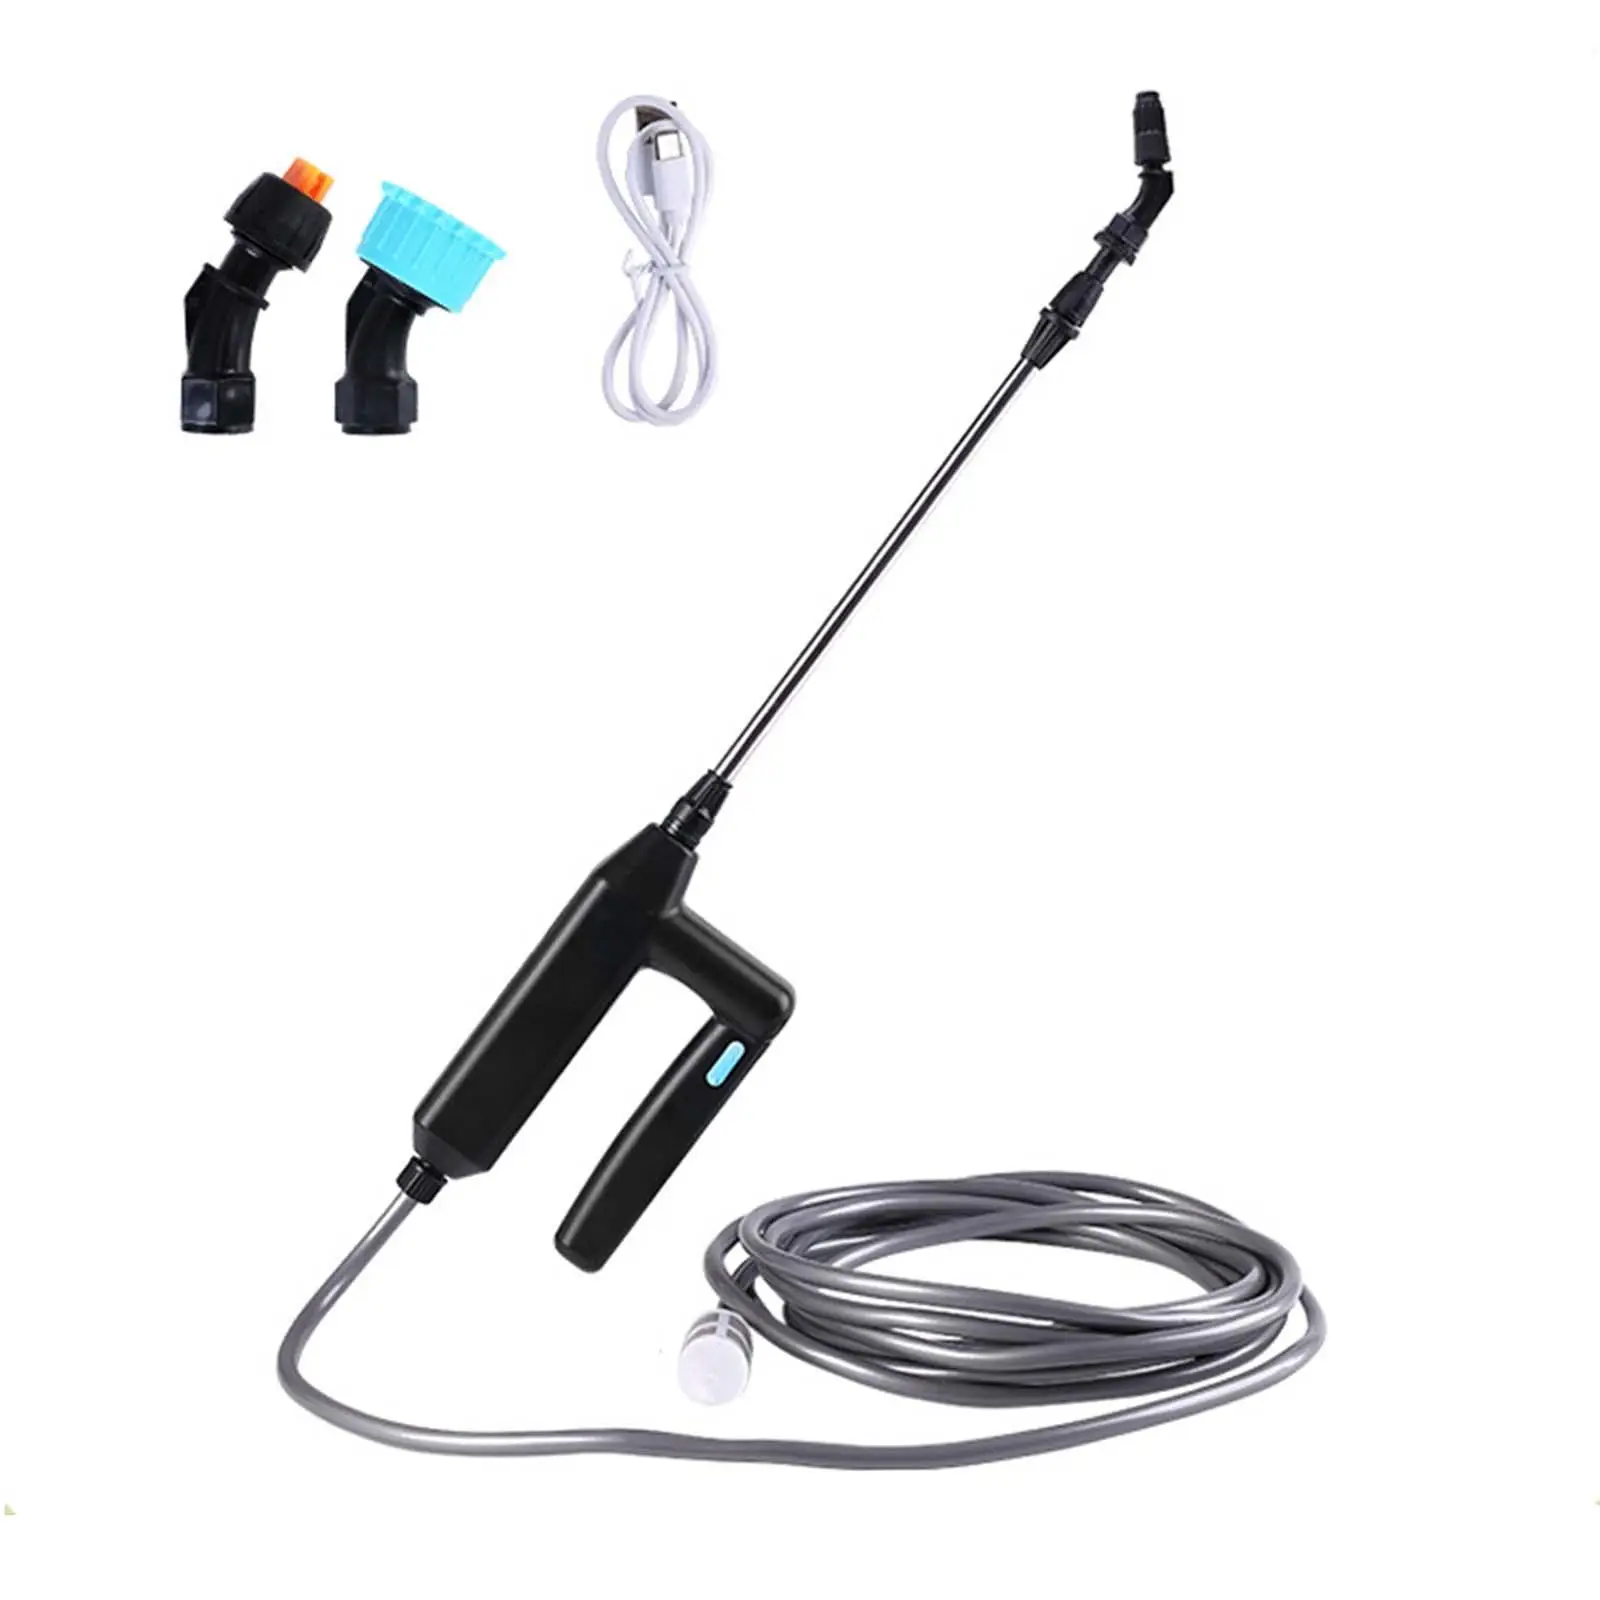 Garden Sprayer Handheld with Hose Nozzle Portable Flower Watering Nozzle for Household Spraying Gardening Watering Home Cleaning